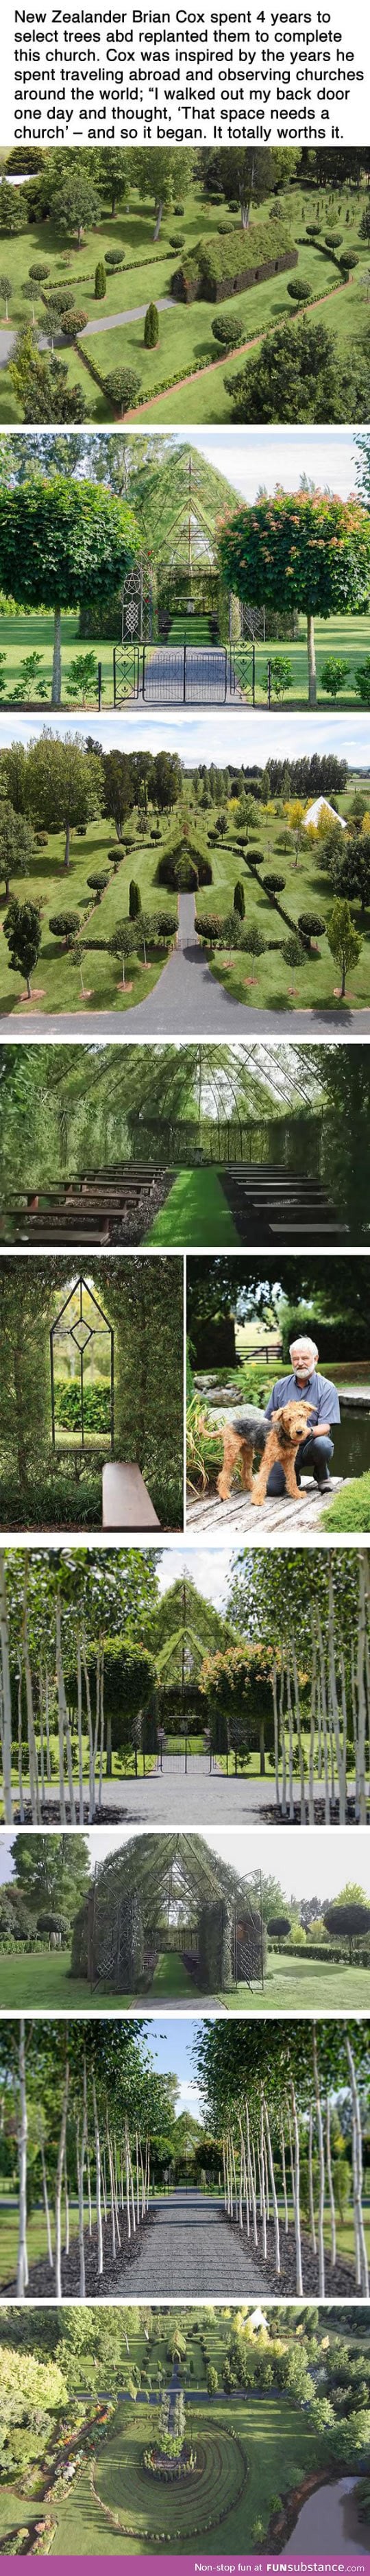 This man spent four years growing a church from trees